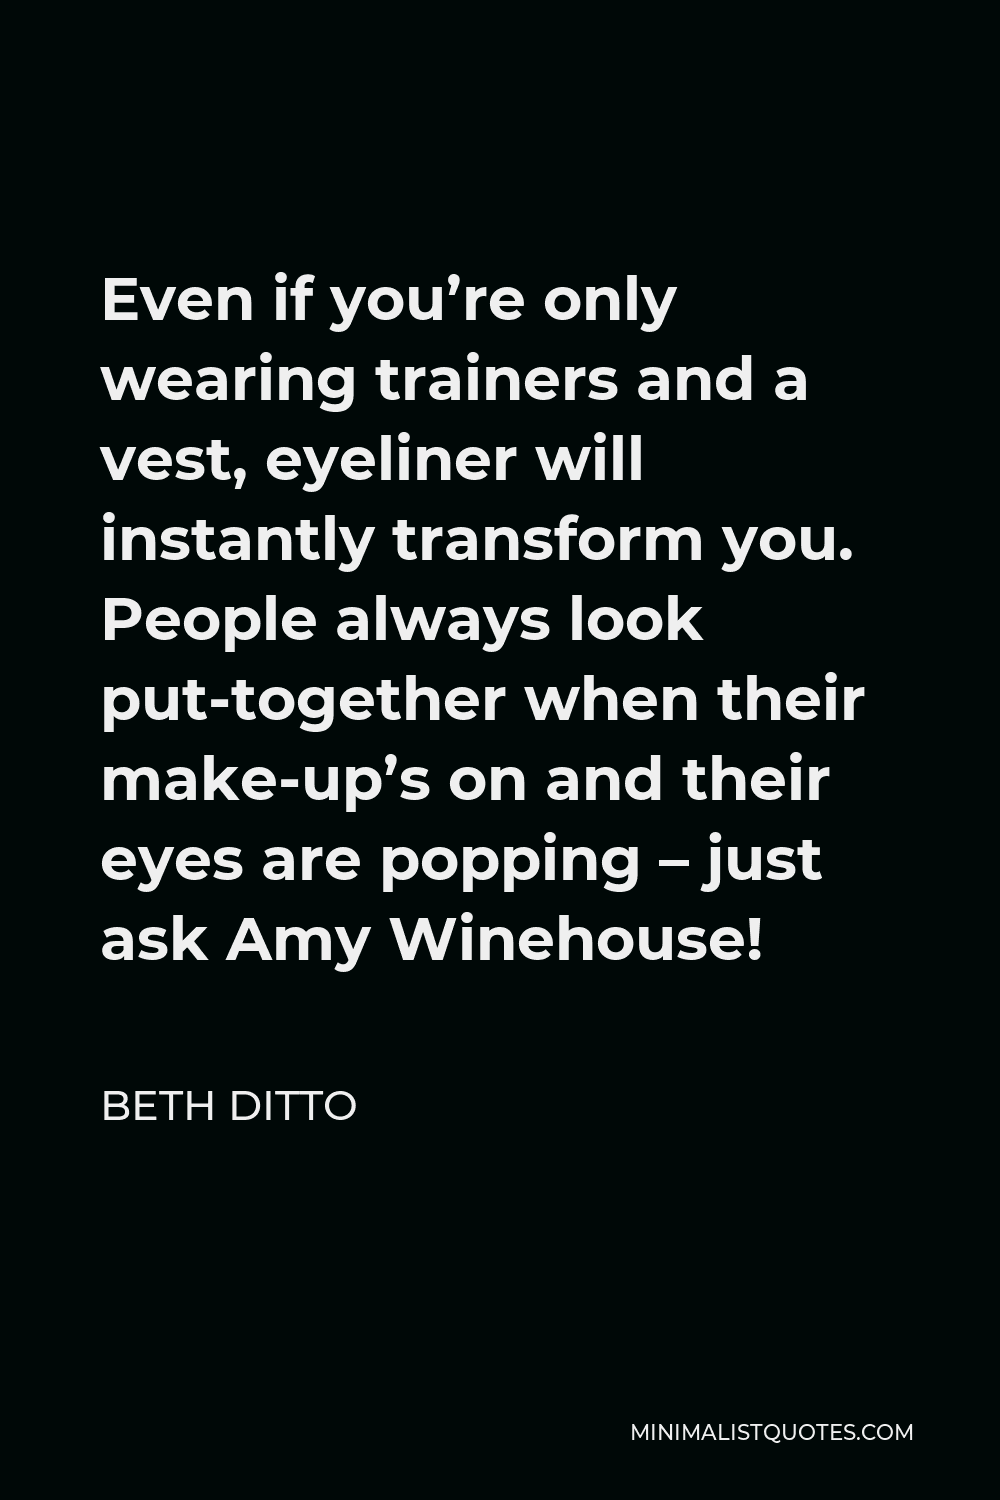 Beth Ditto Quote - Even if you’re only wearing trainers and a vest, eyeliner will instantly transform you. People always look put-together when their make-up’s on and their eyes are popping – just ask Amy Winehouse!